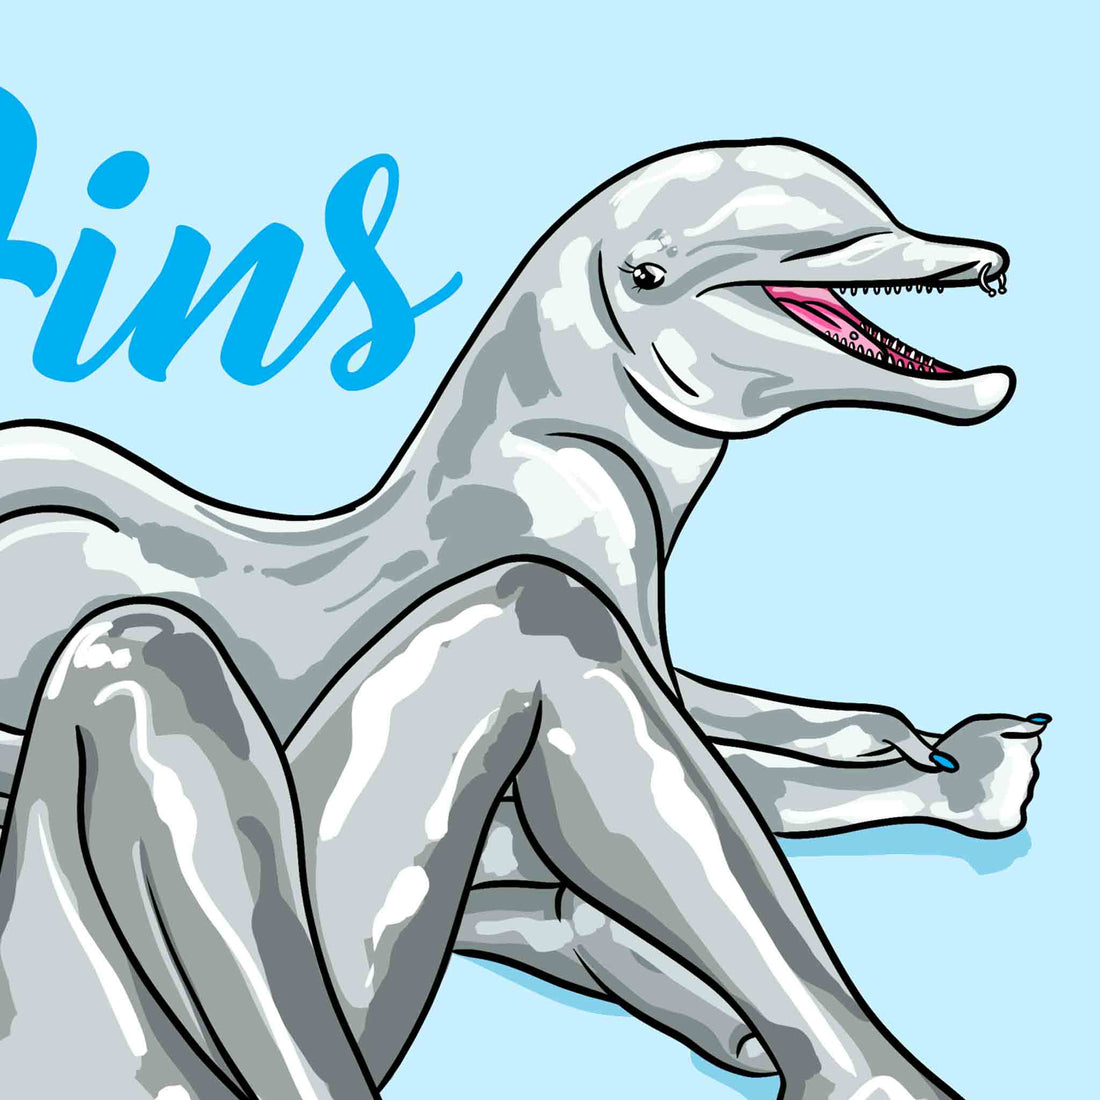 FOLLOW US ON ONLY FINS print